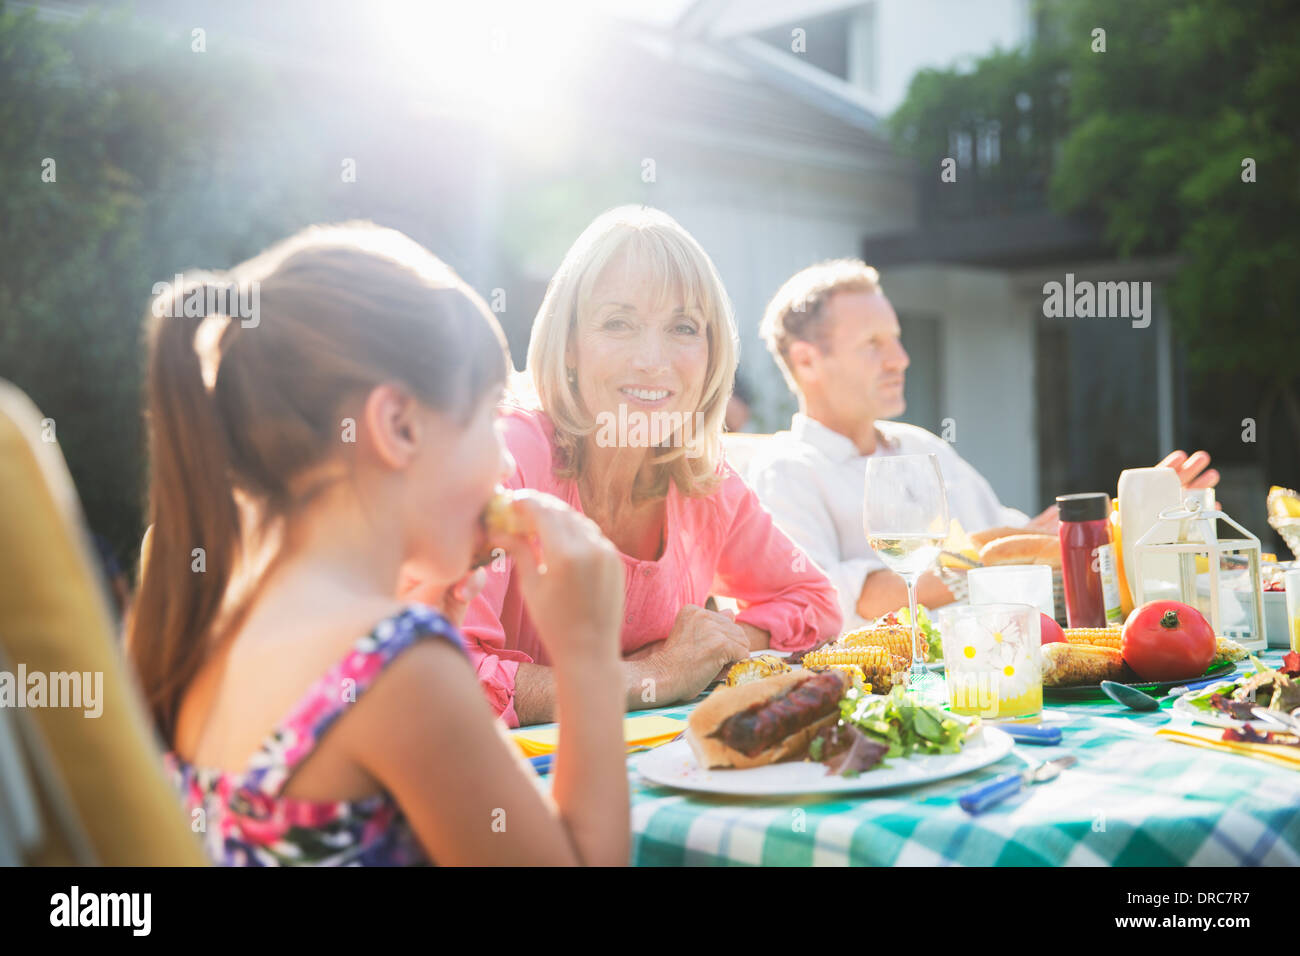 Family eating lunch at patio table Stock Photo